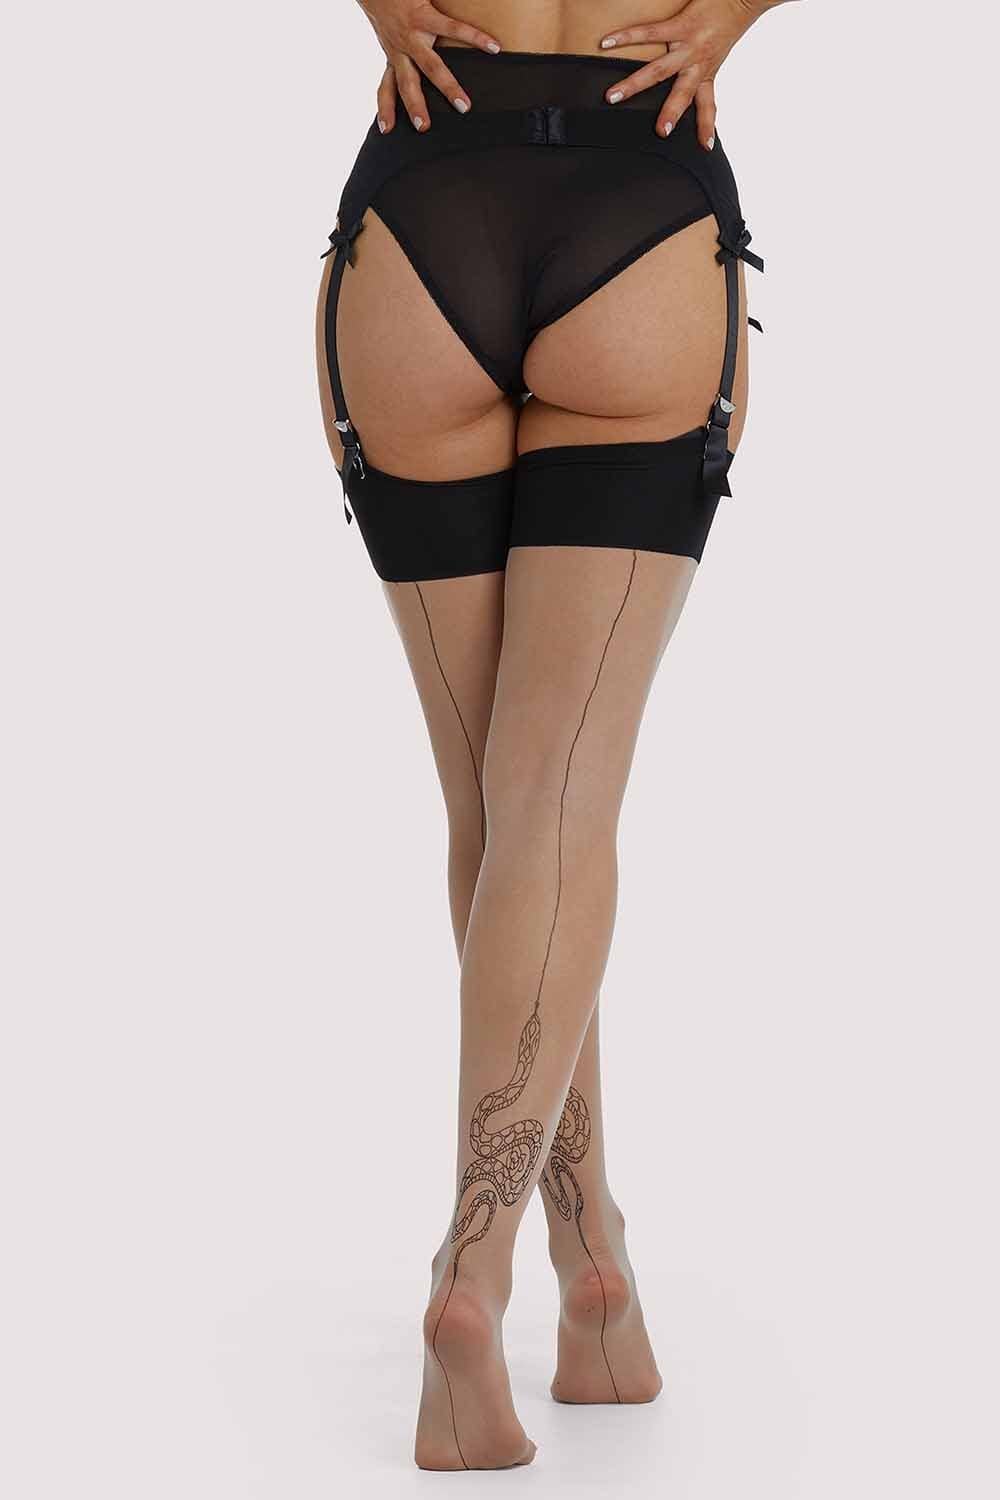 Madame X Black Suspender Belt - For Her from The Luxe Company UK